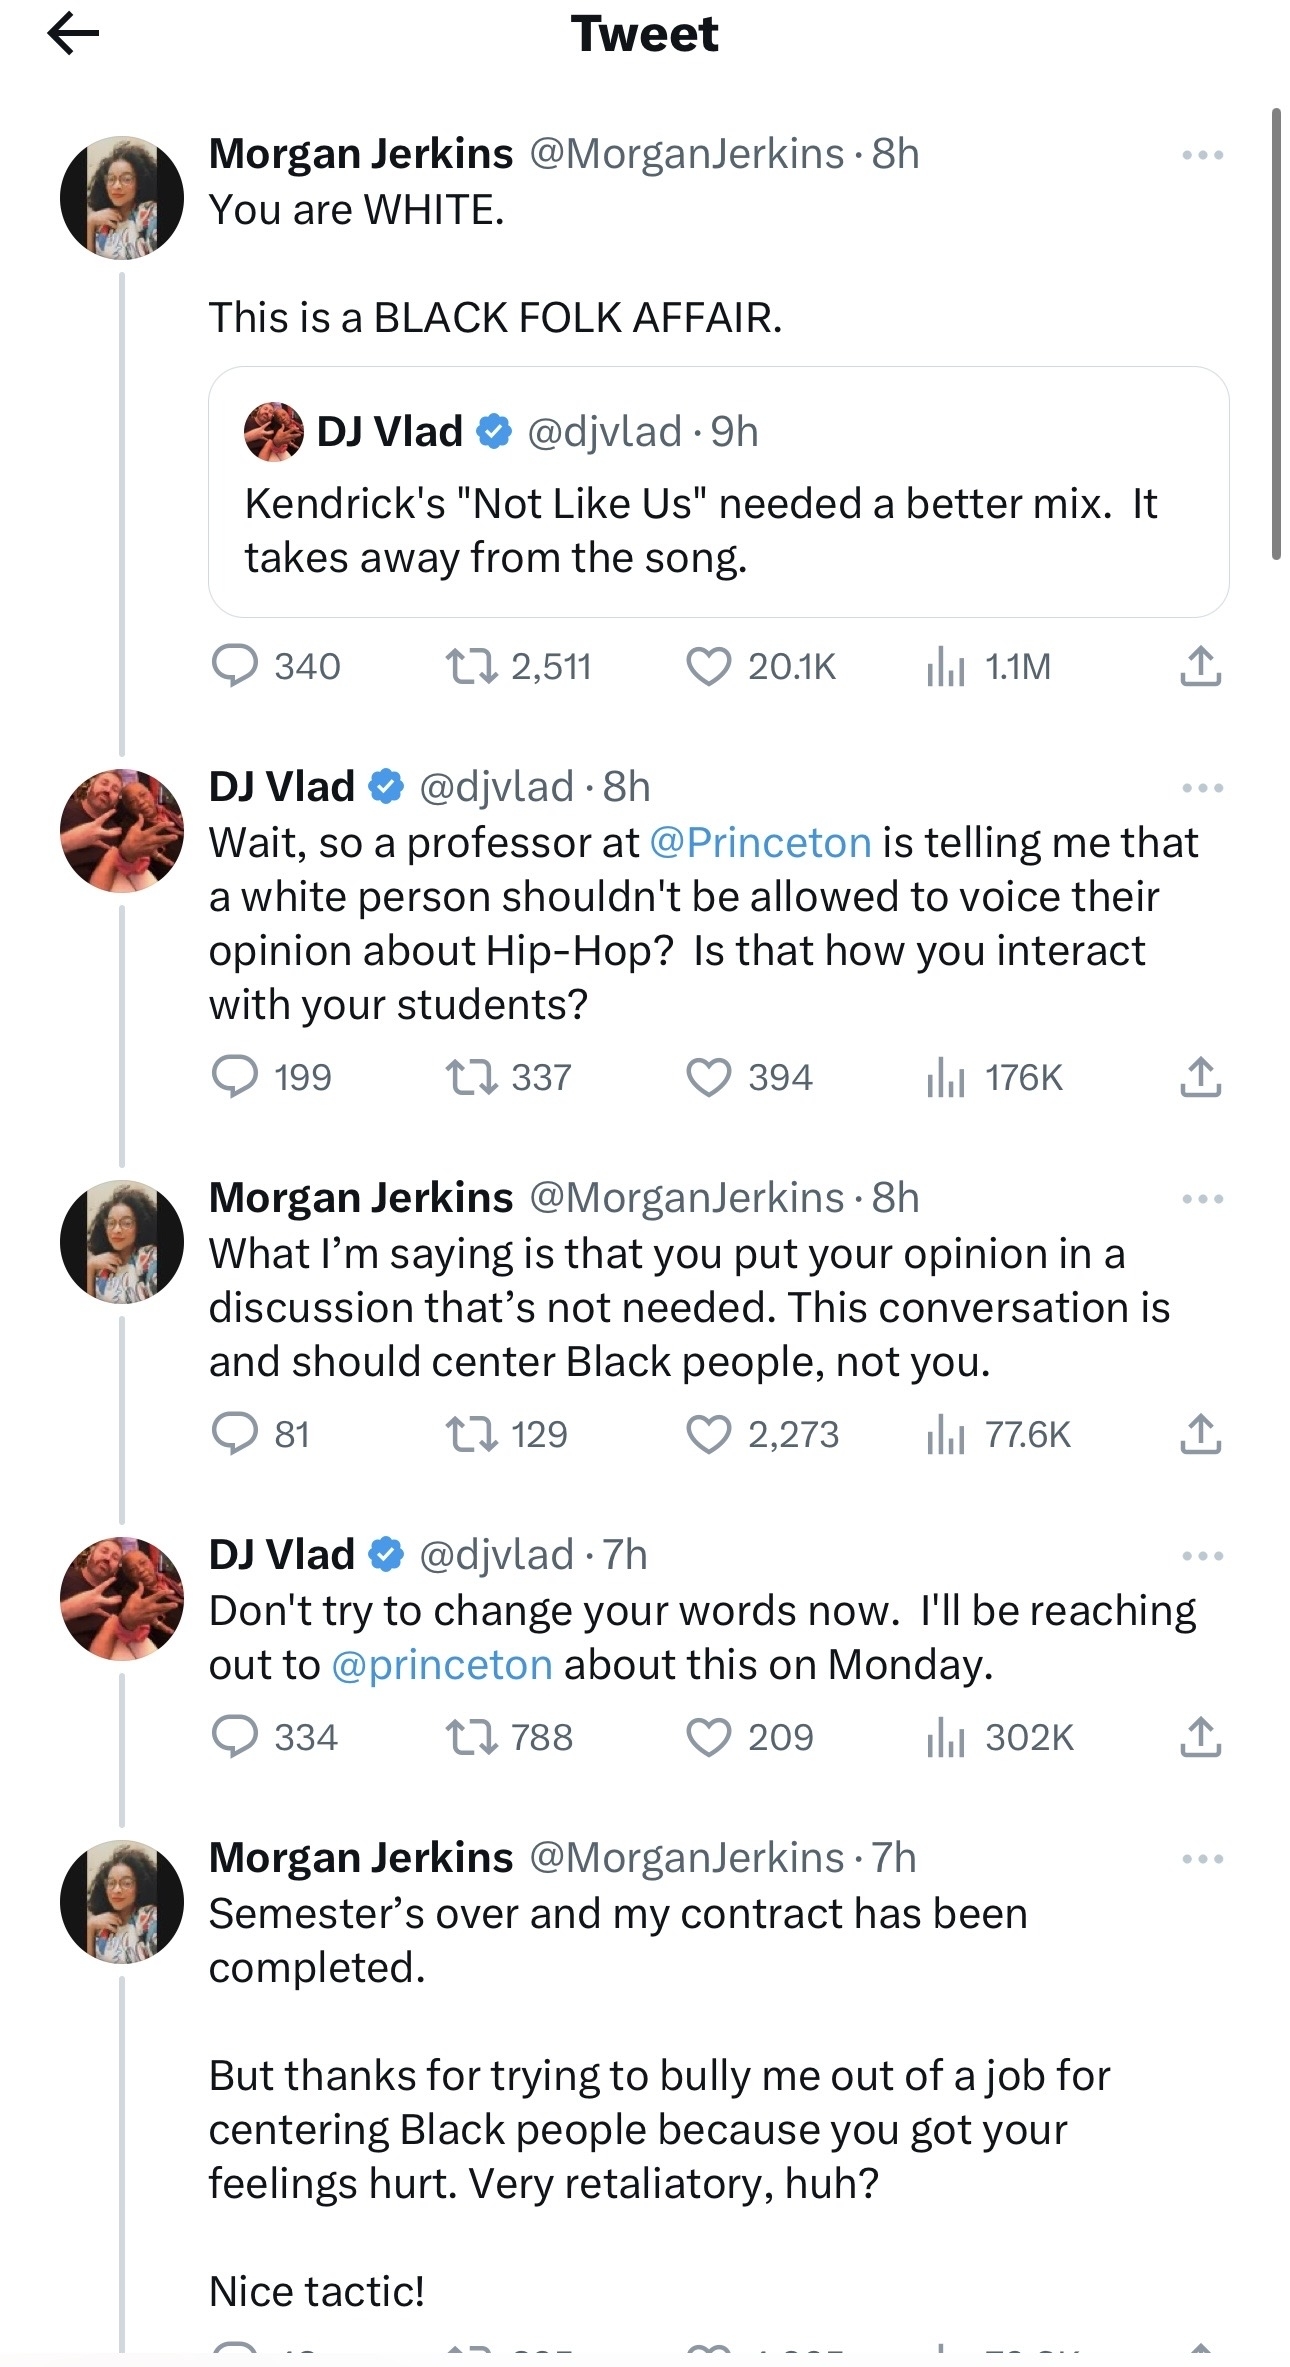 A screenshot of a Twitter feed featuring a discussion between users @DJVlad and @MorganJerkins on cultural appropriation in music